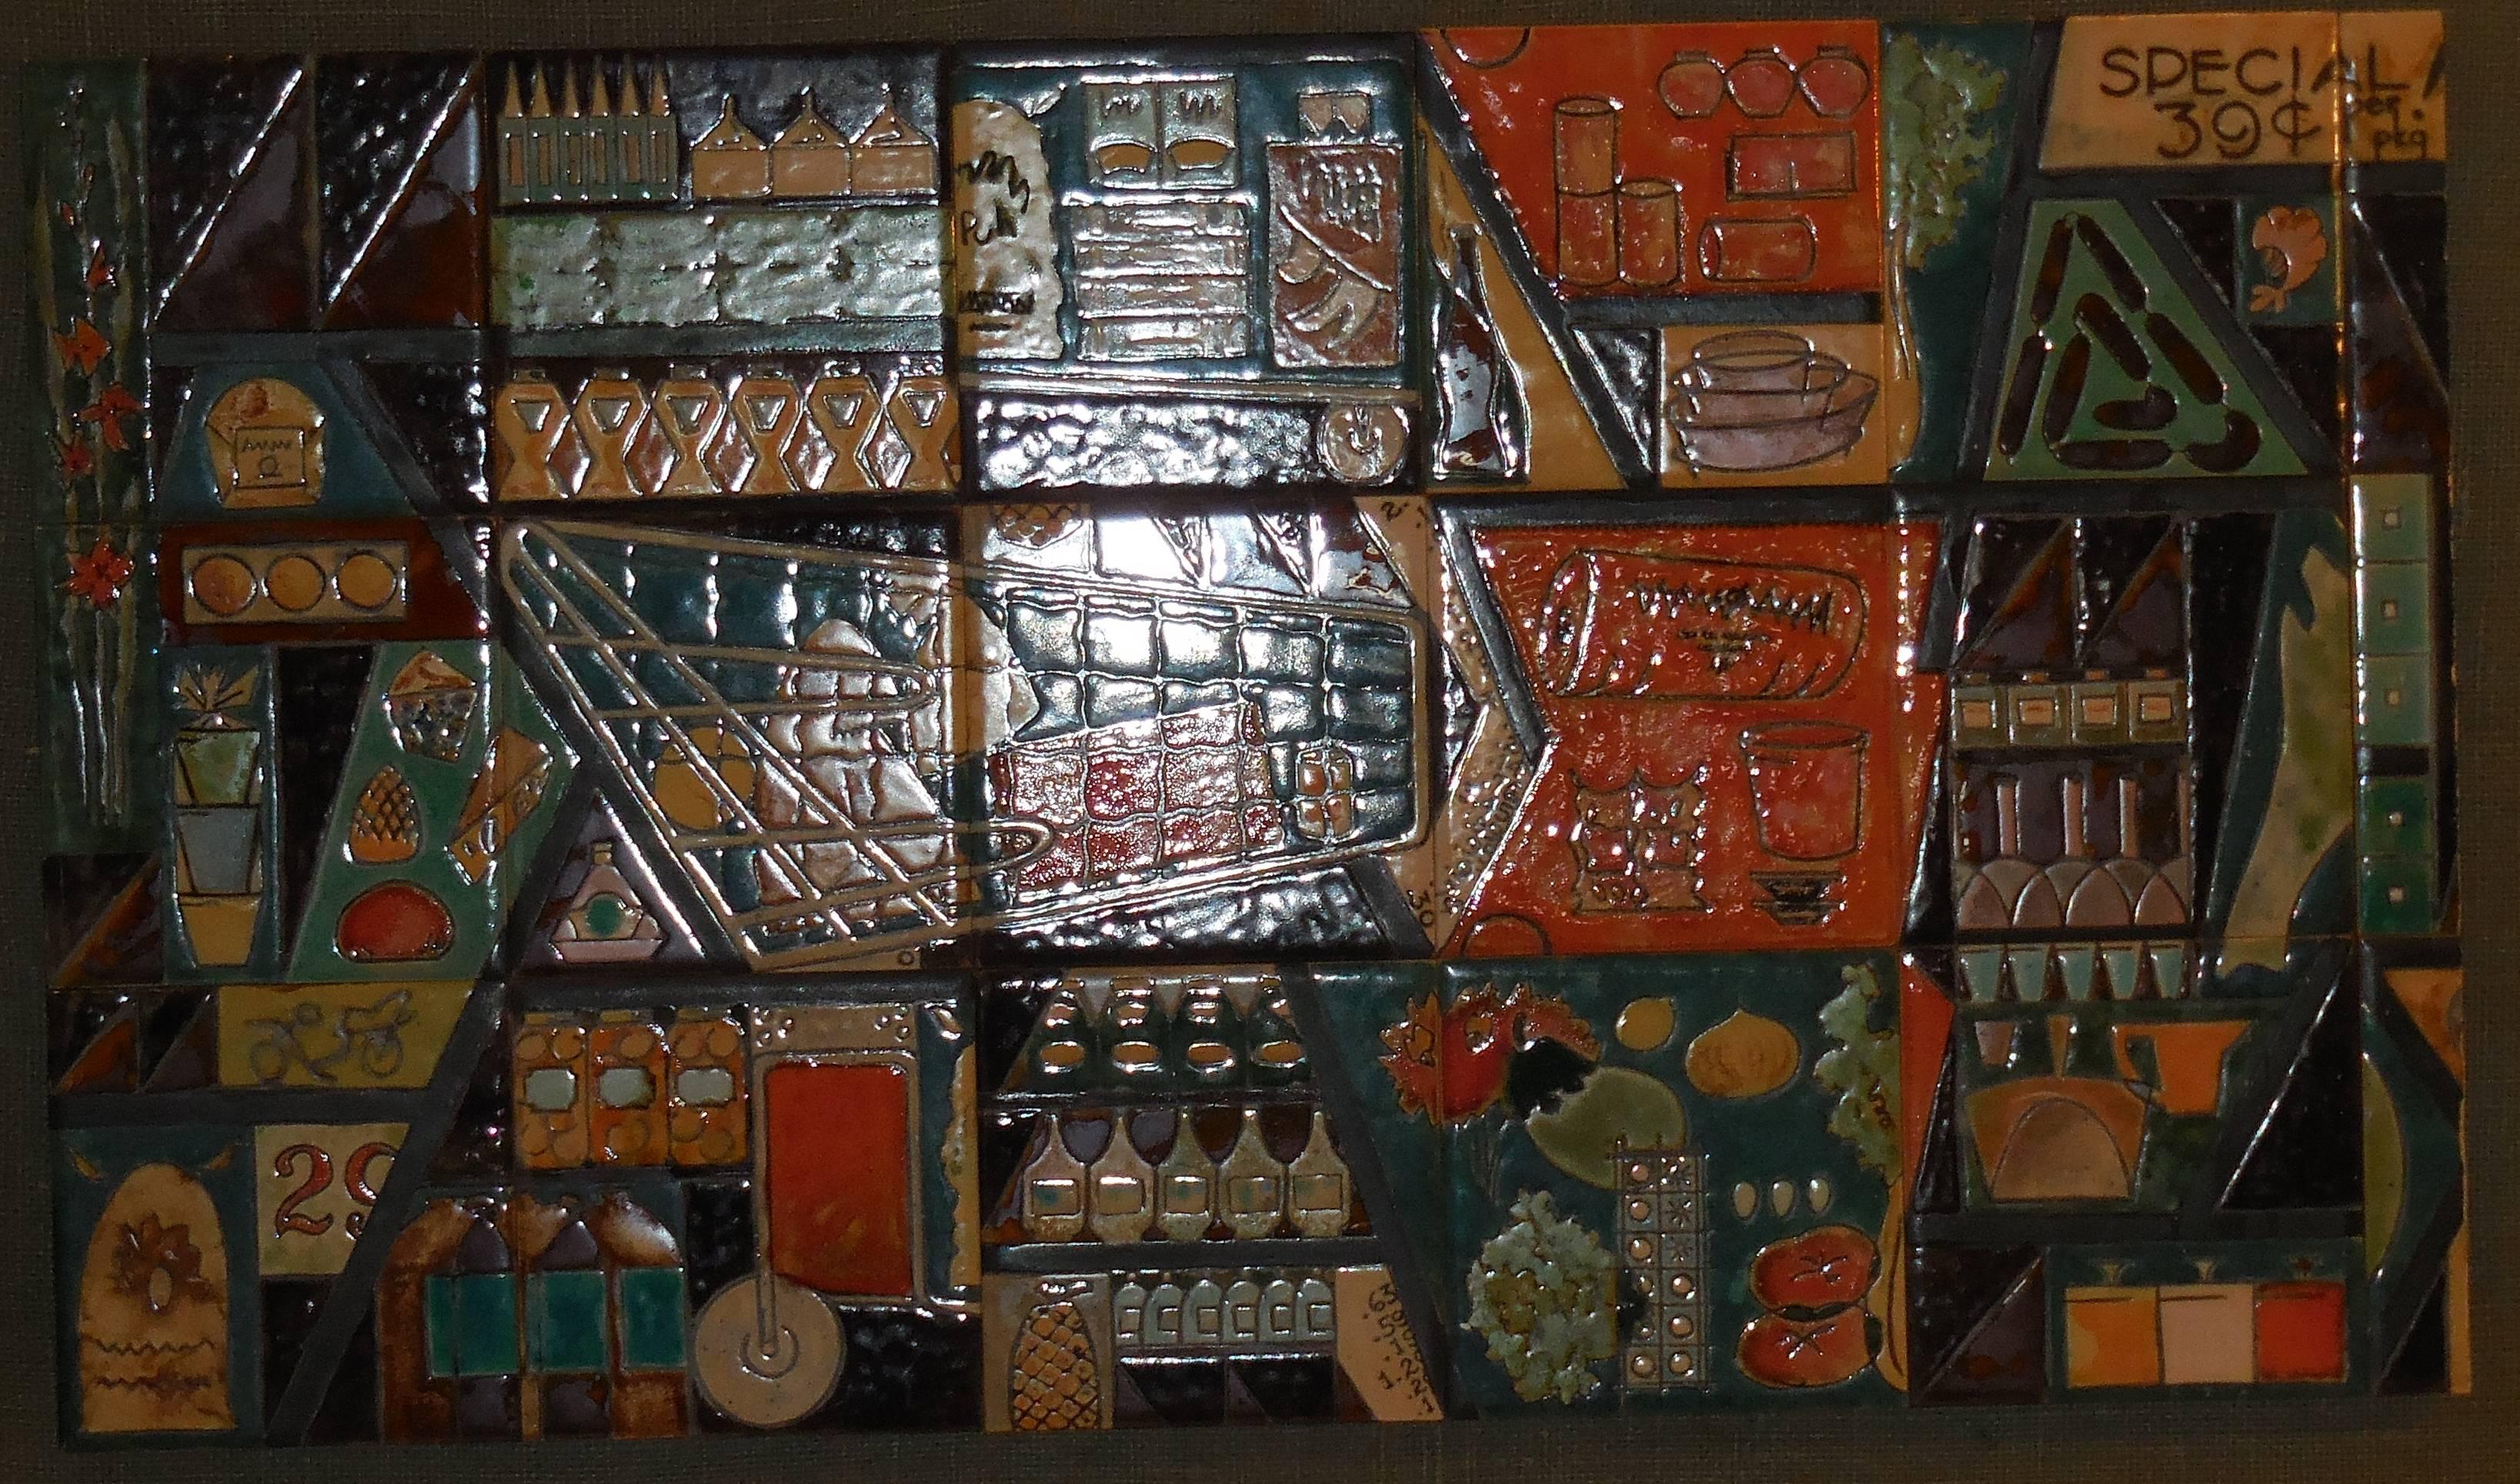 One of a kind vintage ceramic tiles wall hanging, viewing industrial market 
Made of 15 tiles size: 6